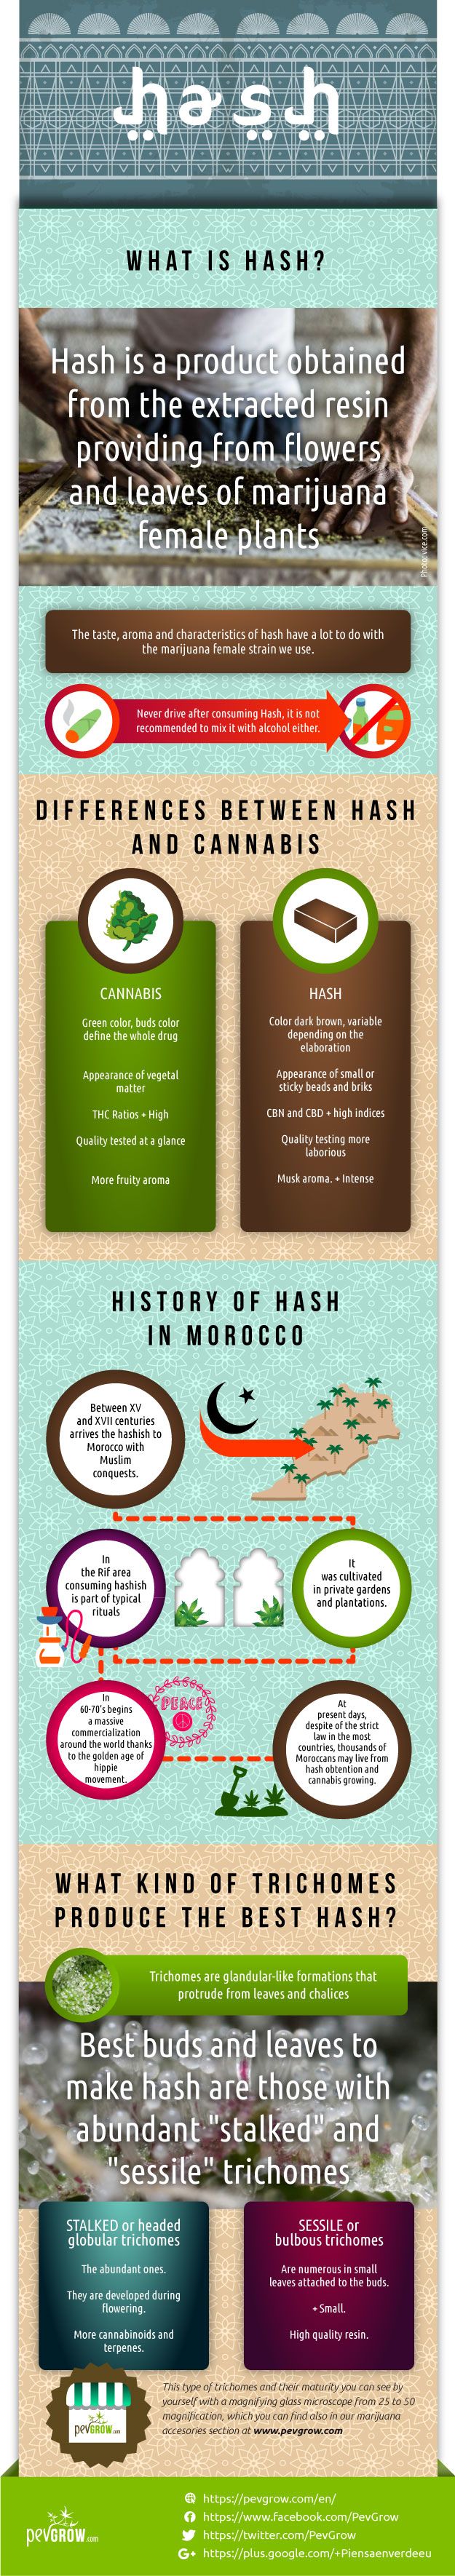 Infographic about hashish